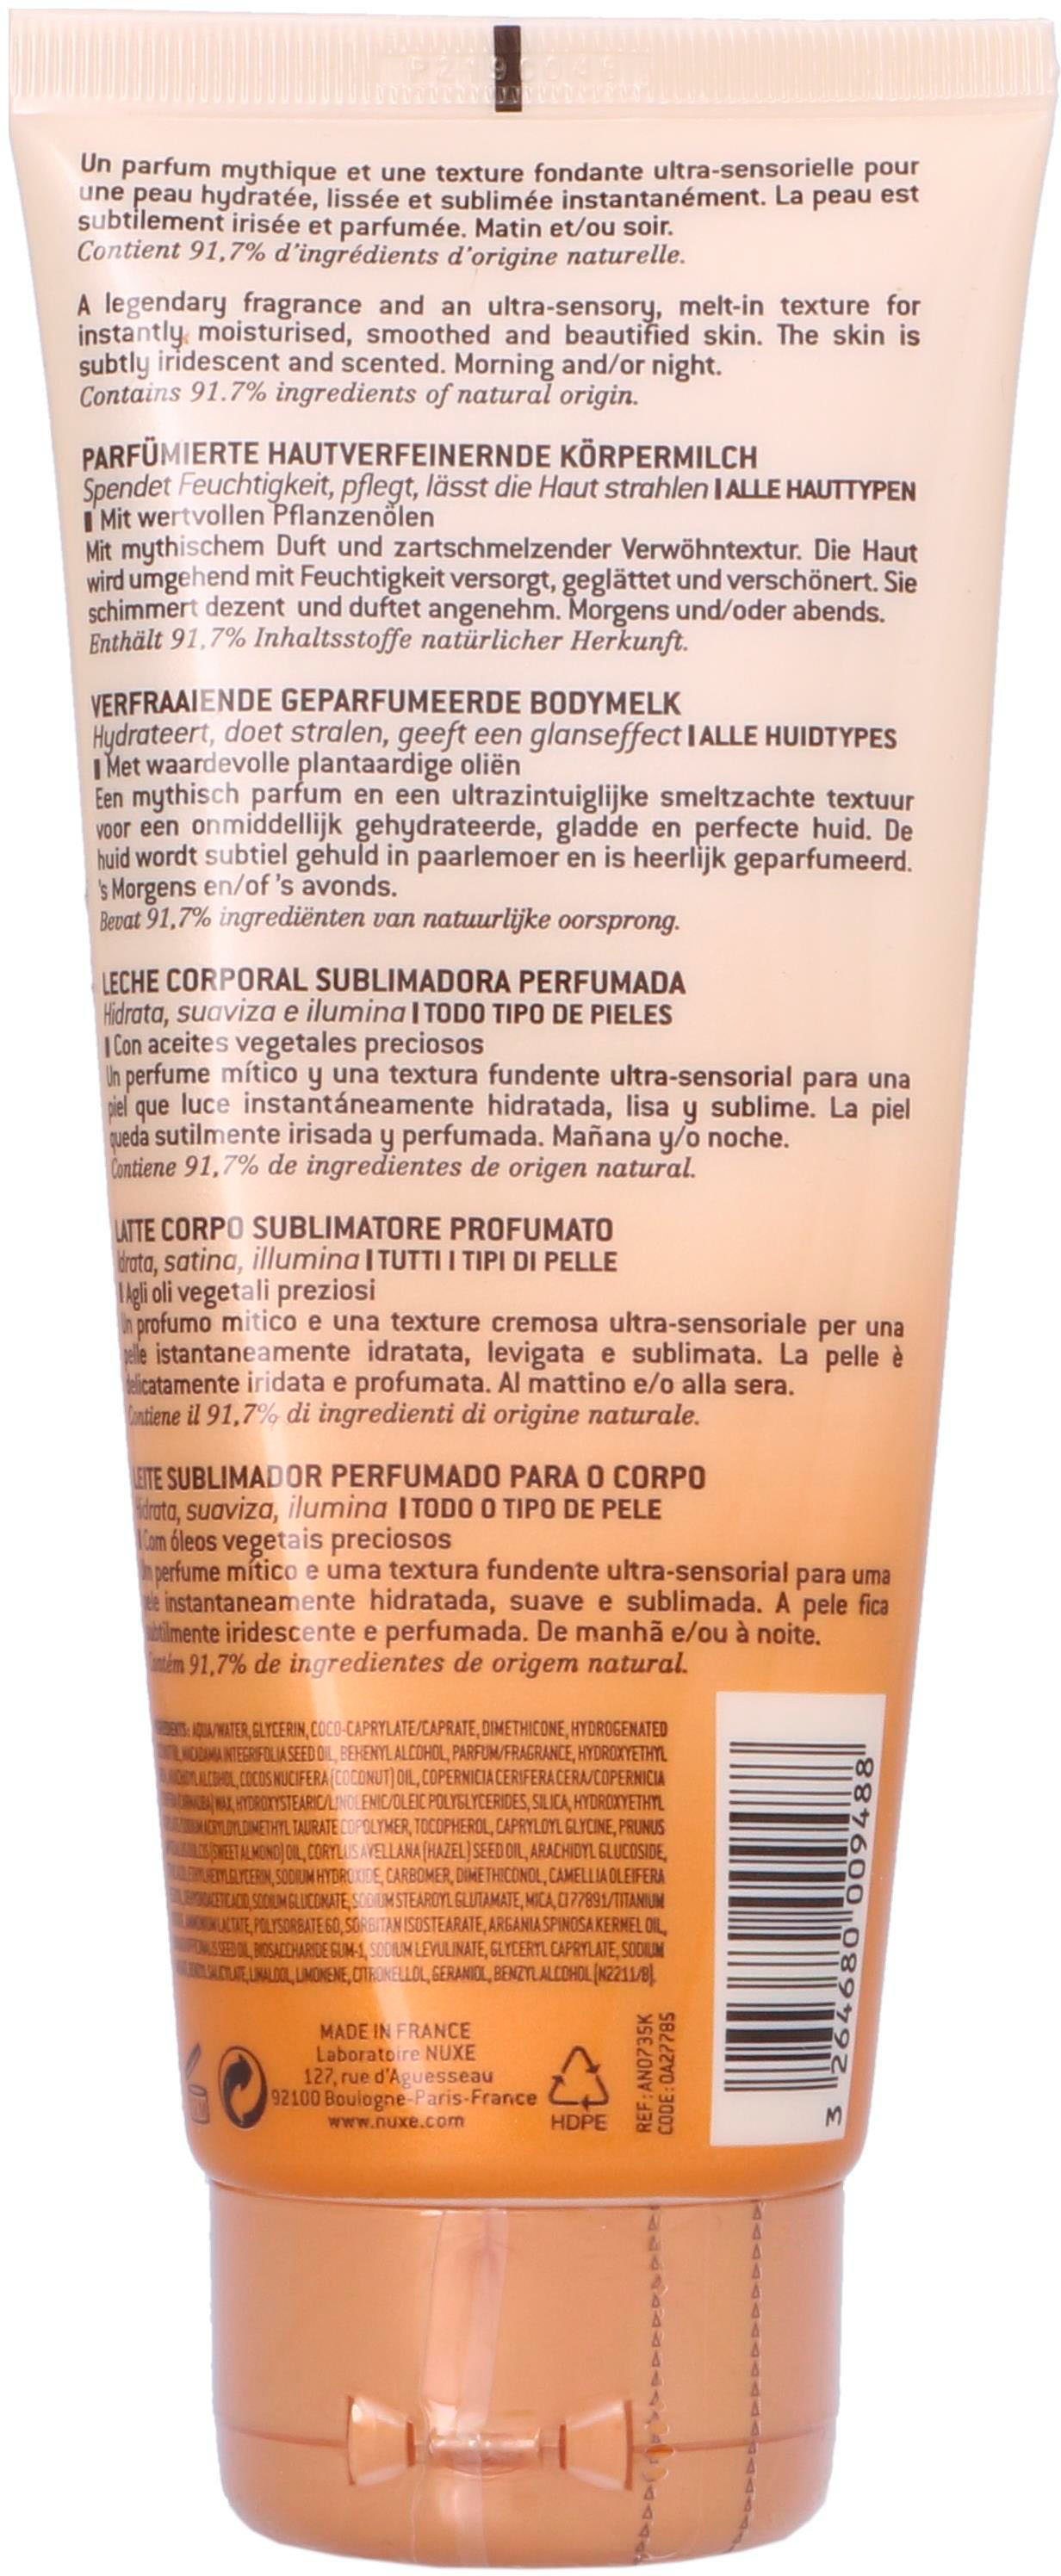 Lotion Nuxe Prodigieux Body Lait Scented Bodylotion Beautyfying